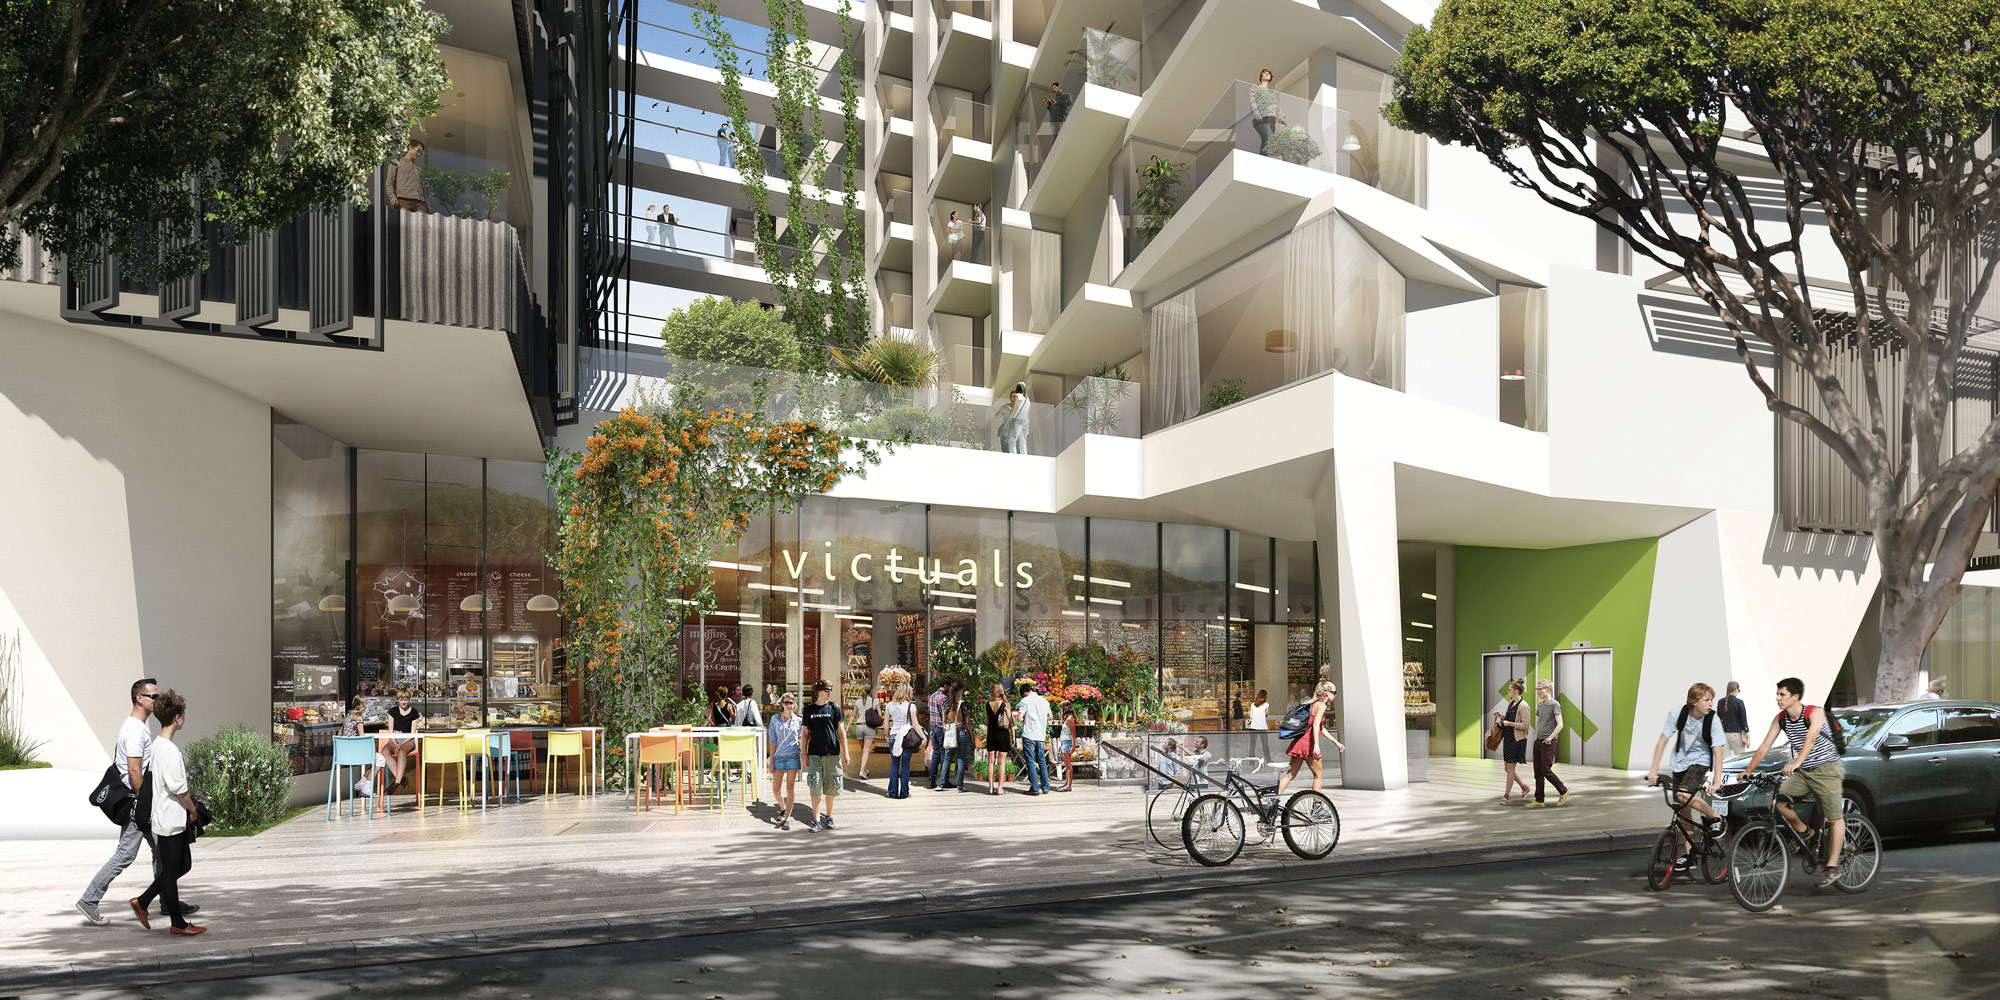 The market-rate development features a deeply-recessed shopping street with outdoor seating that is flanked by a colonnade, creating a shaded and cool pedestrian area near the Expo Line terminus. (Courtesy Koning Eizenberg Architects)